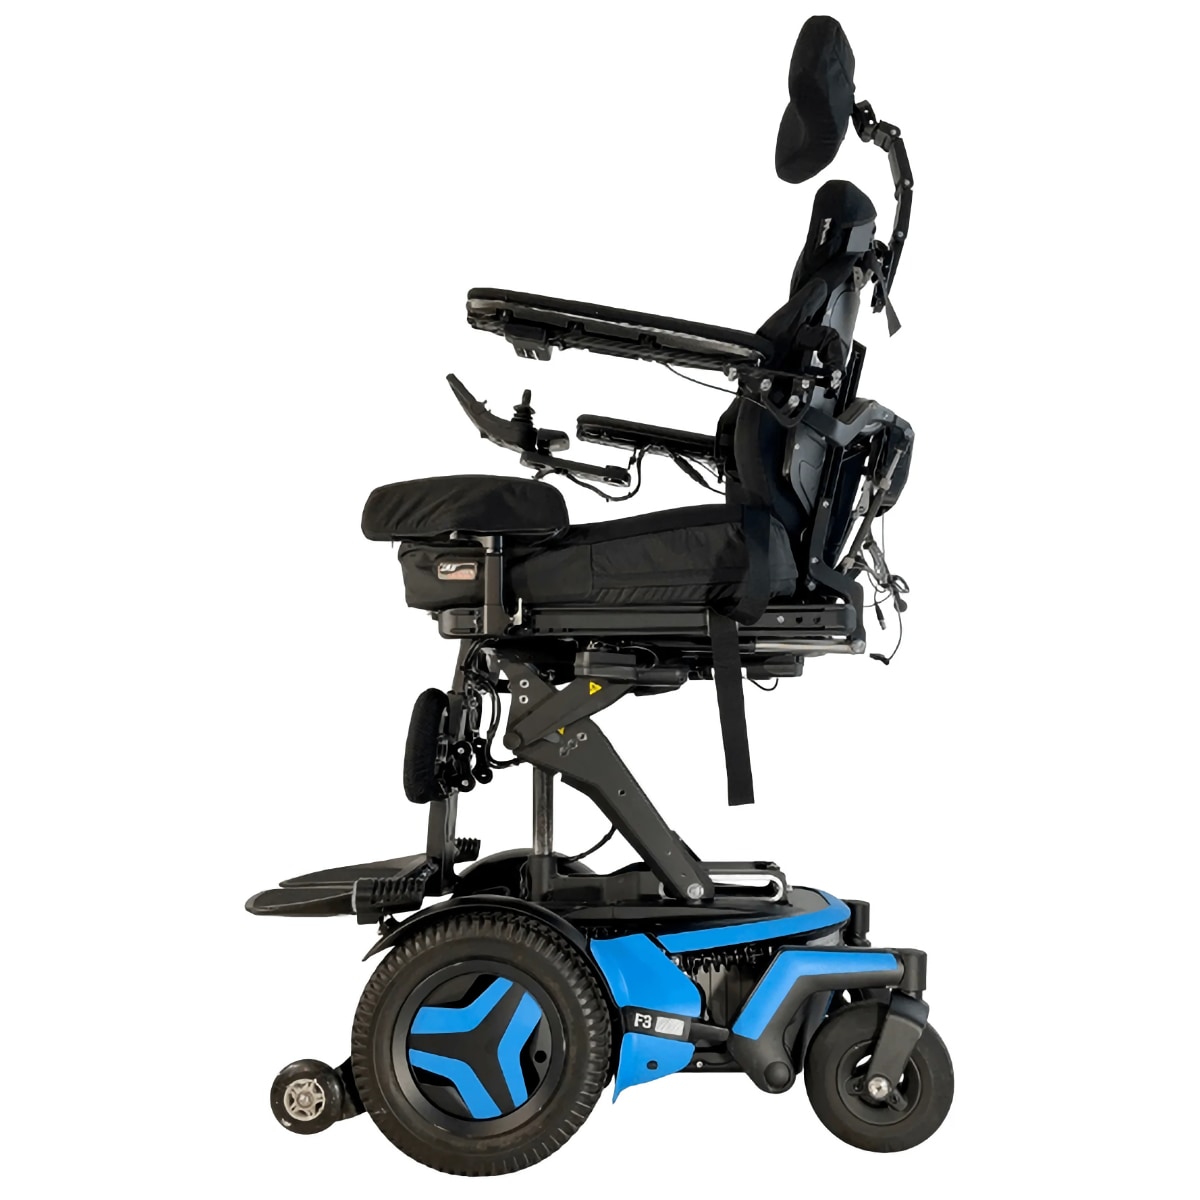 Permobil F3 complex rehab wheelchair with blue accents in elevated position